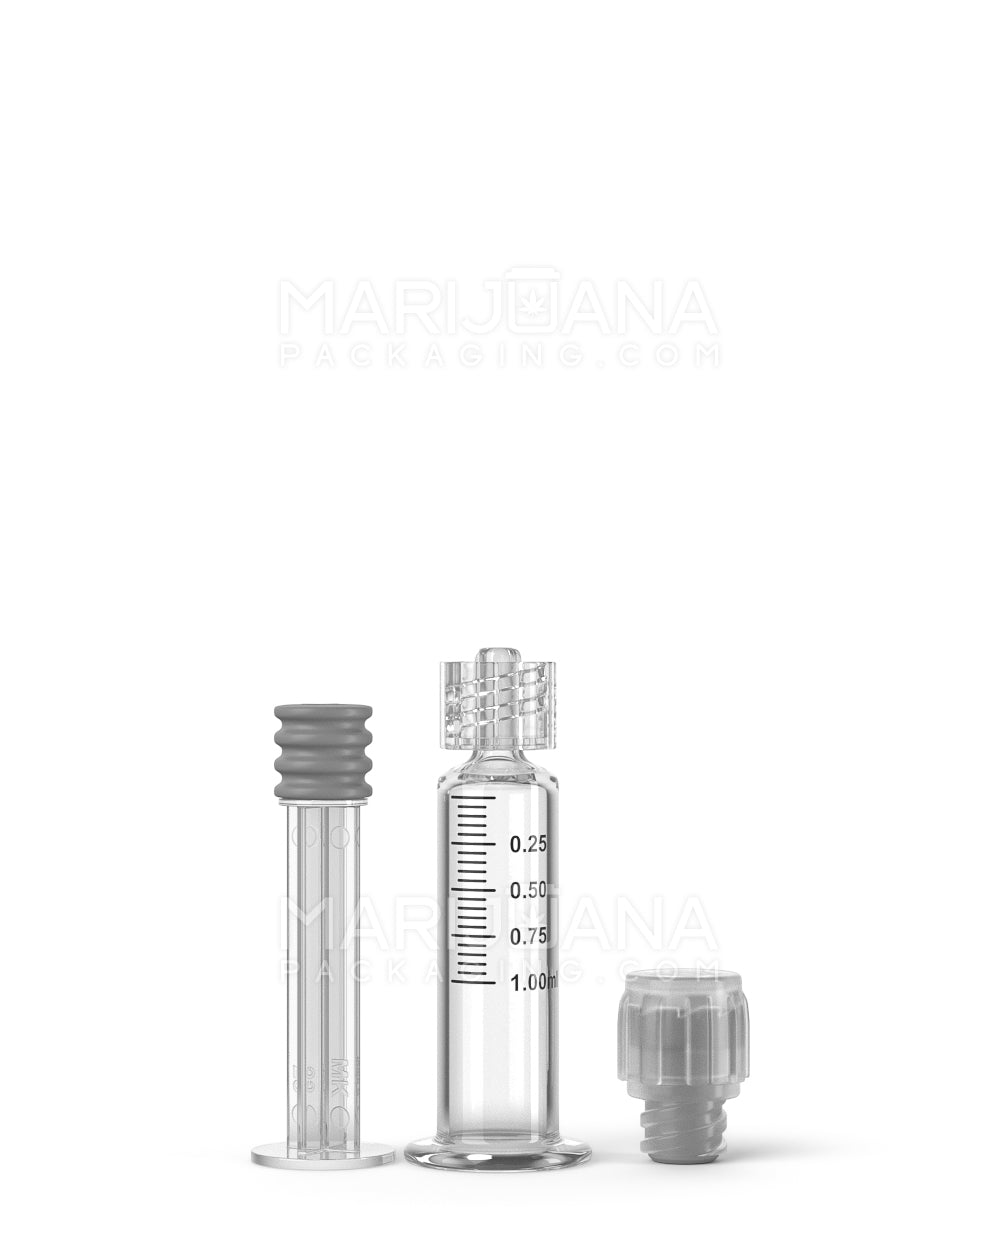 Child Resistant & Luer Lock | Glass Dab Applicator Syringes | 1mL - 0.25mL Increments - 100 Count - 3